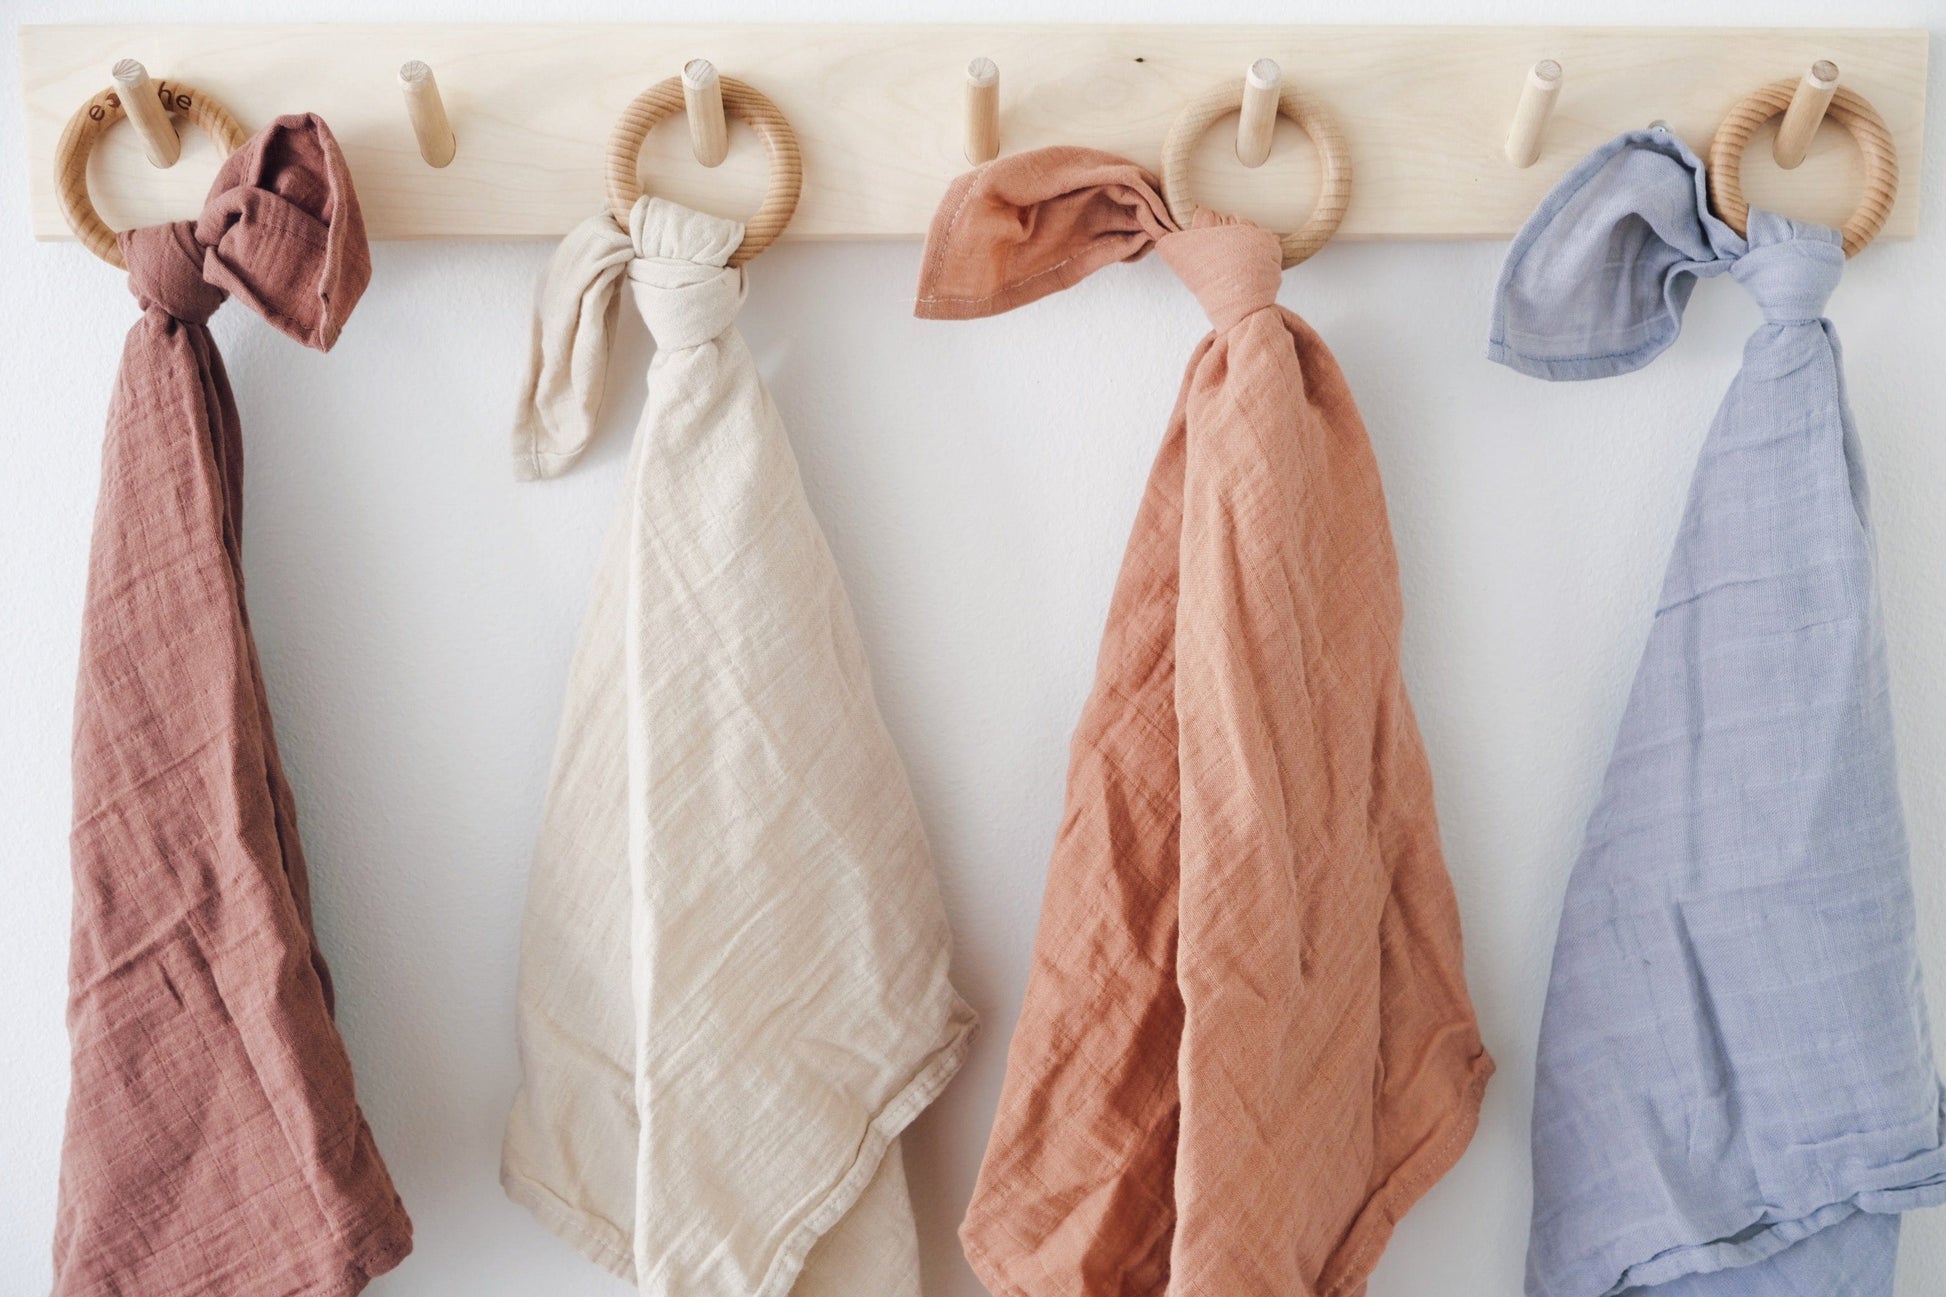 organic cotton baby loveys made in the usa hanging on a peg board